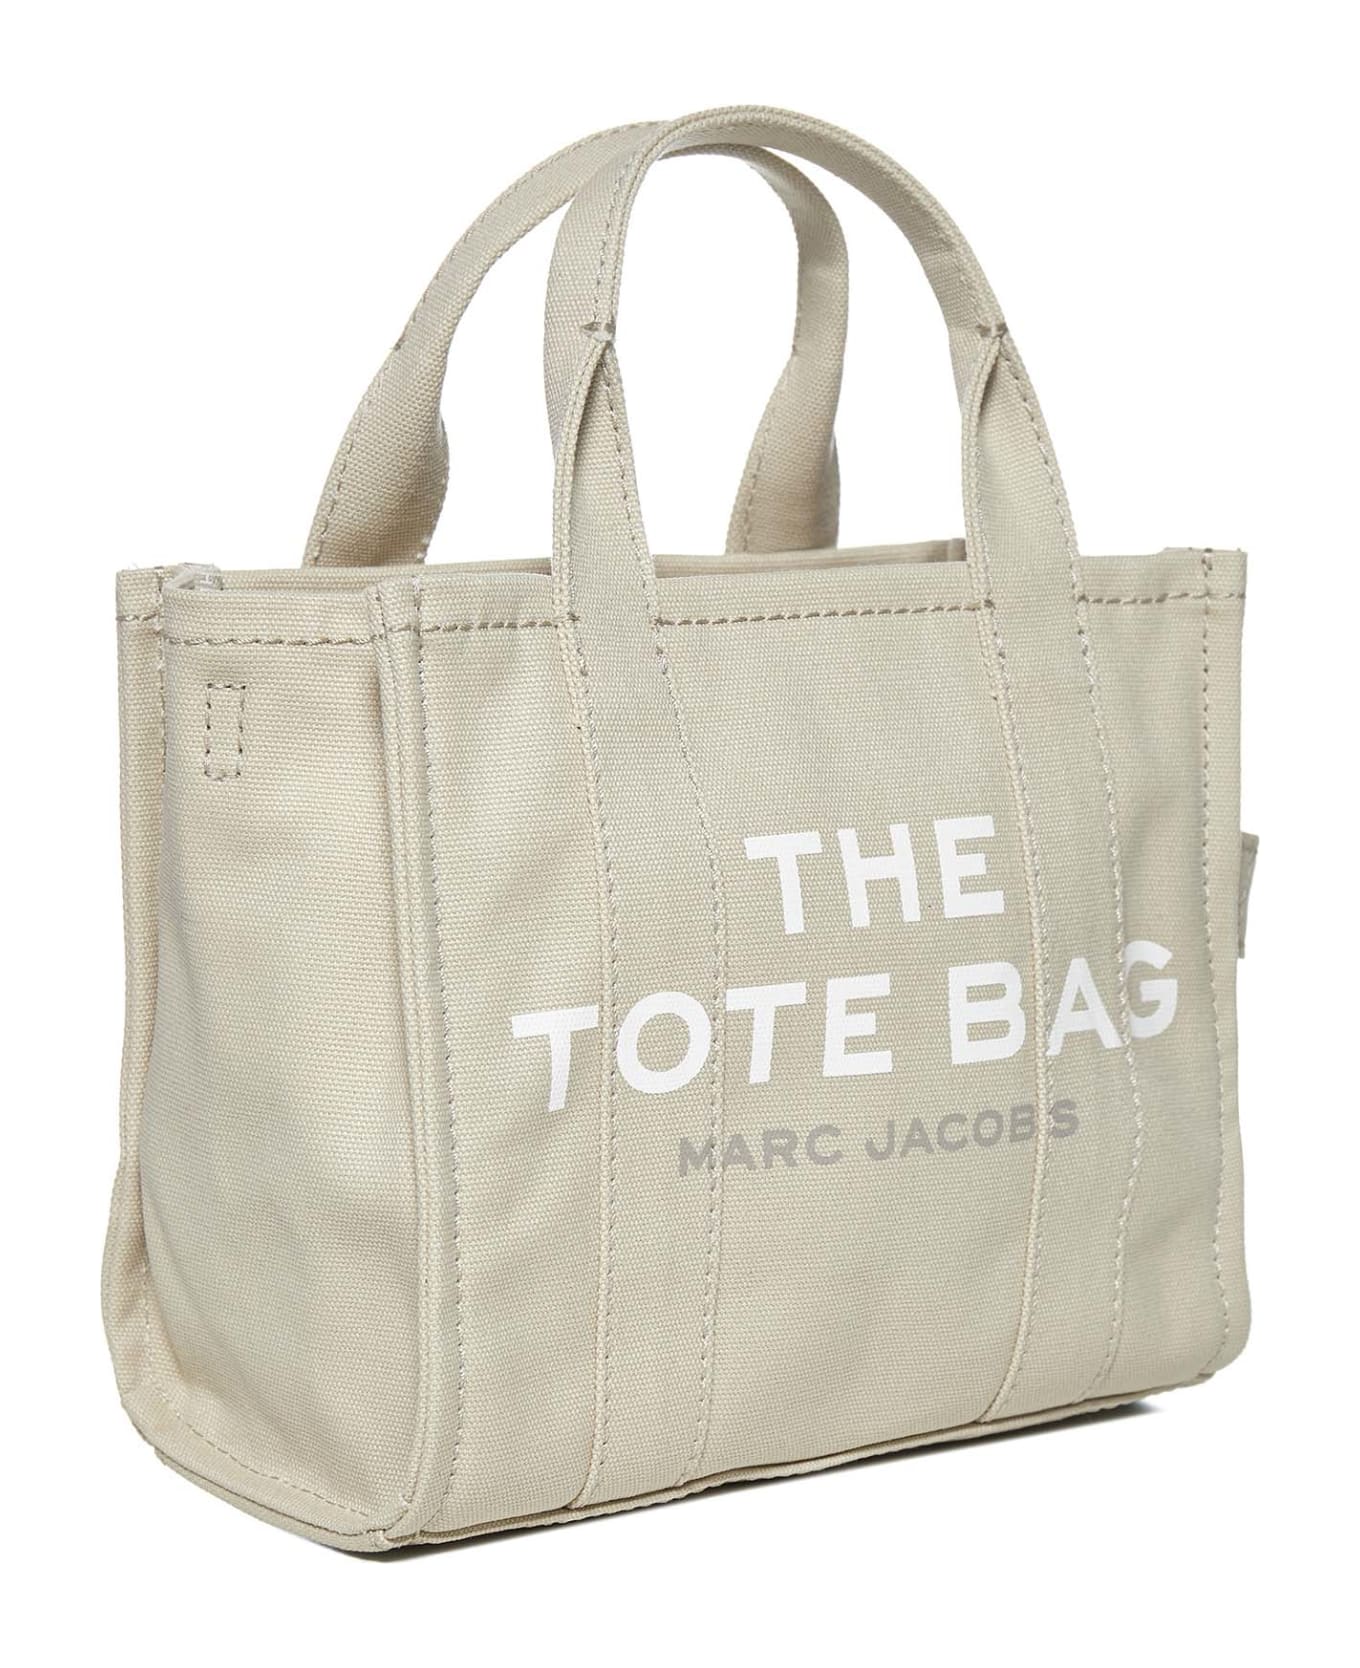 Marc Jacobs The Mini Tote Bag - Beige トートバッグ